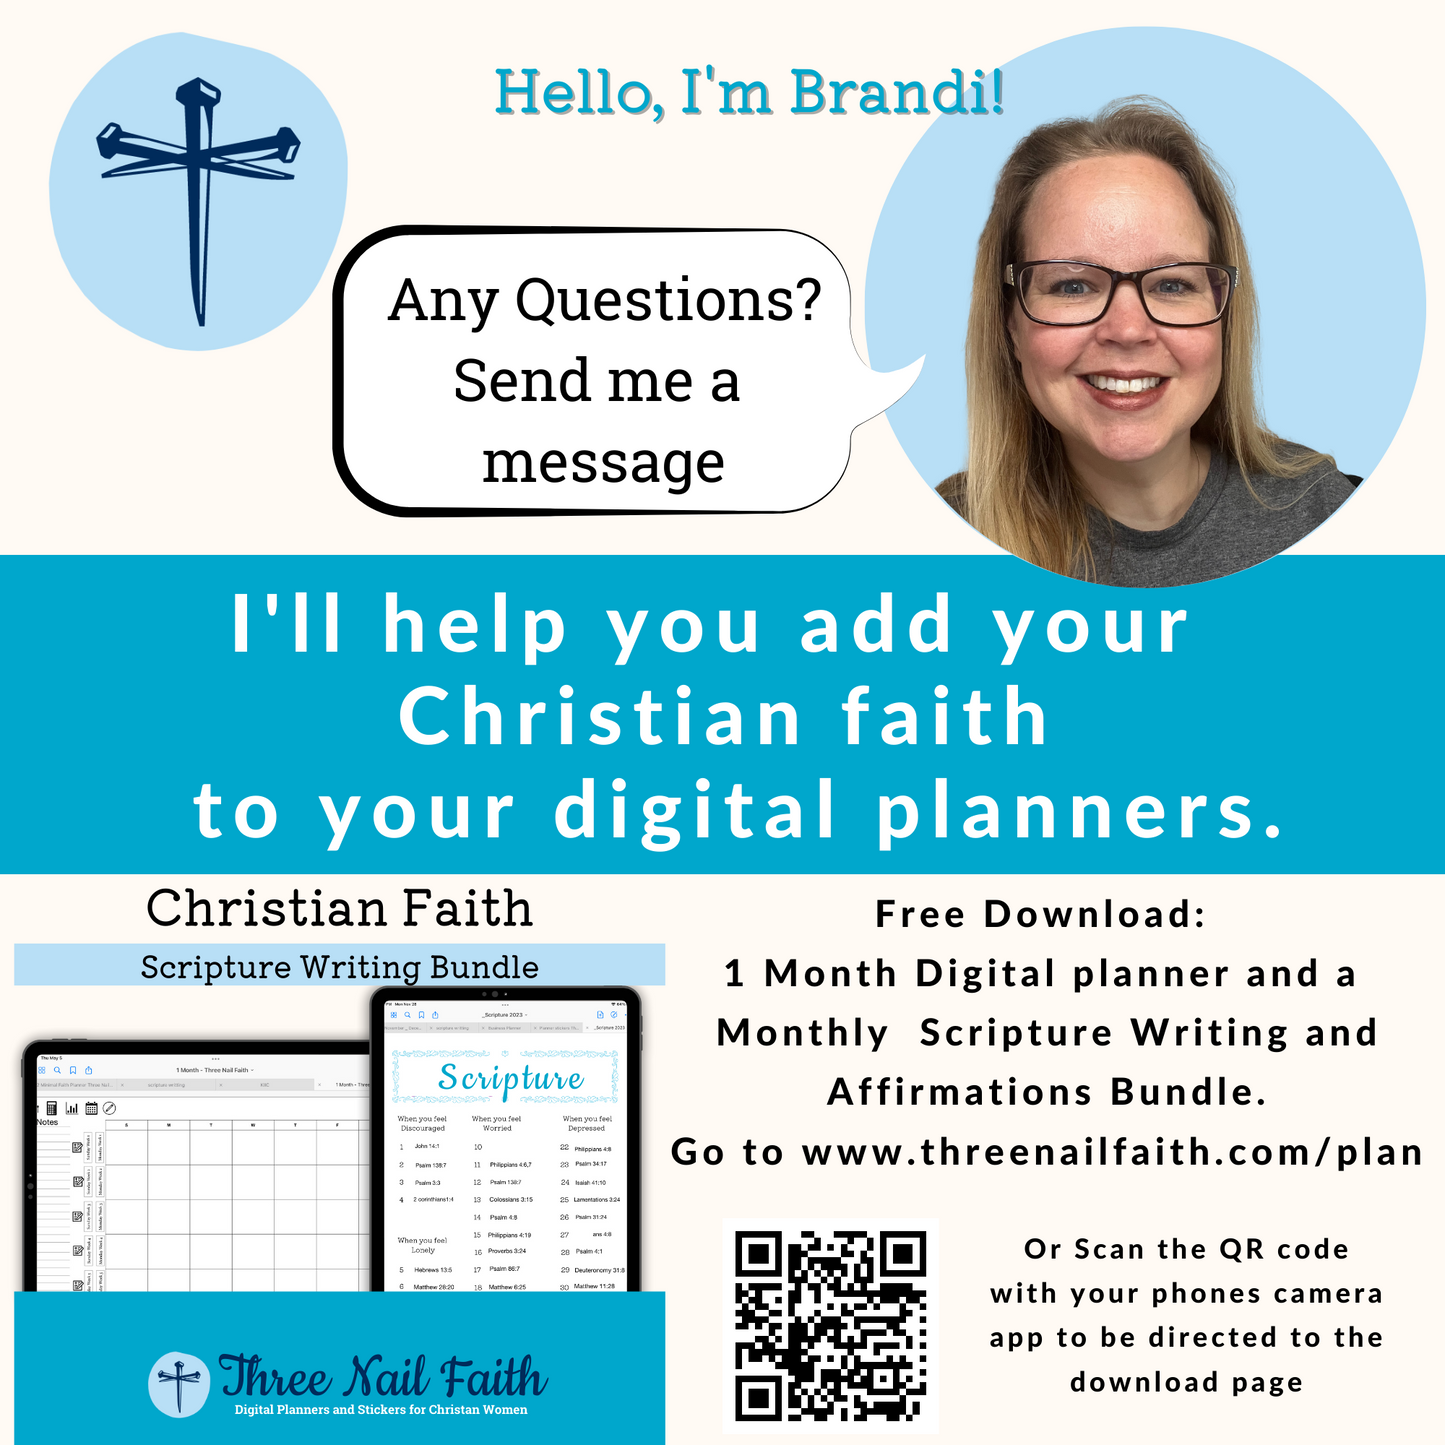 Brandi Reid, Owner of Three Nail Faith. I Create digital planners and stickers for Christian Women so that you can get closer to God. Download the Free scripture bundle. www.threenailfaith.com/plan